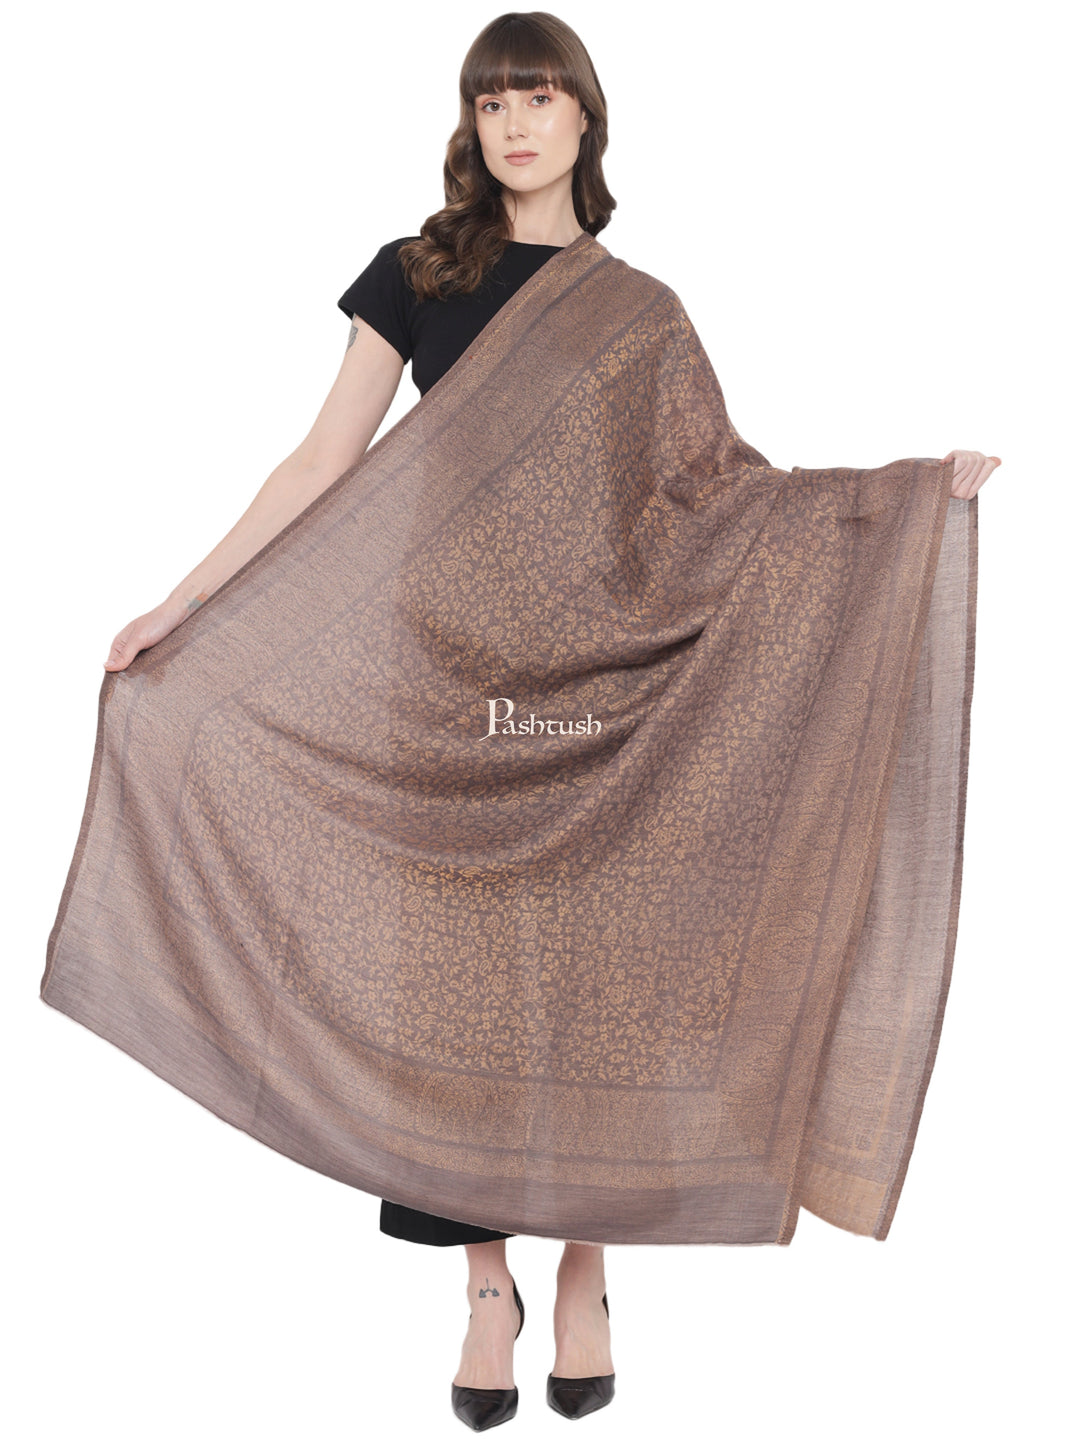 Pashtush Womens Twilight Collection Shawl, With Metallic Weave, Fine Wool, Taupe